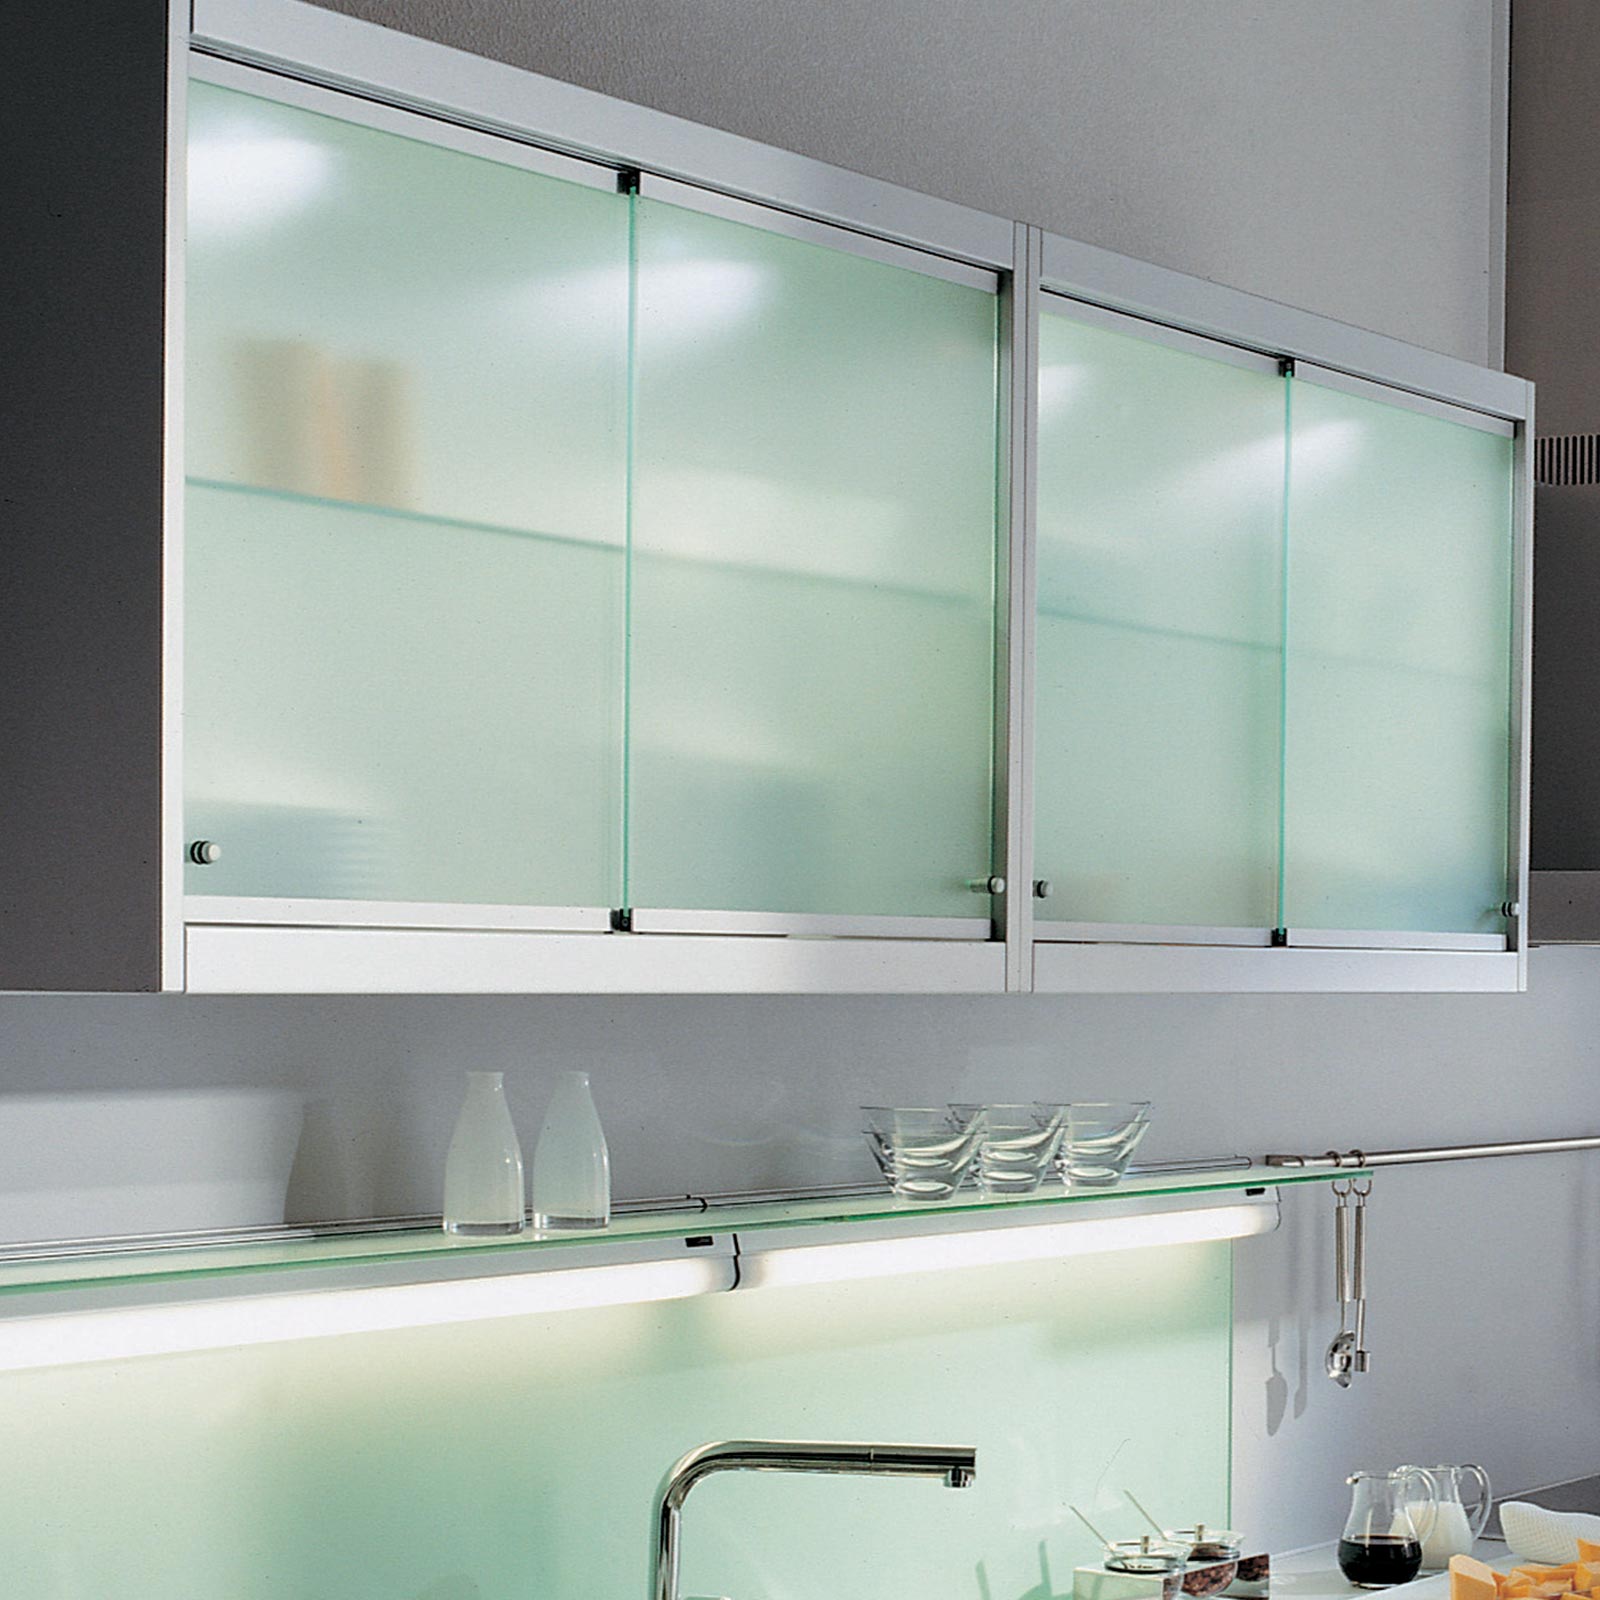 Replace Cabinet Doors With Glass Or Sliding Panels